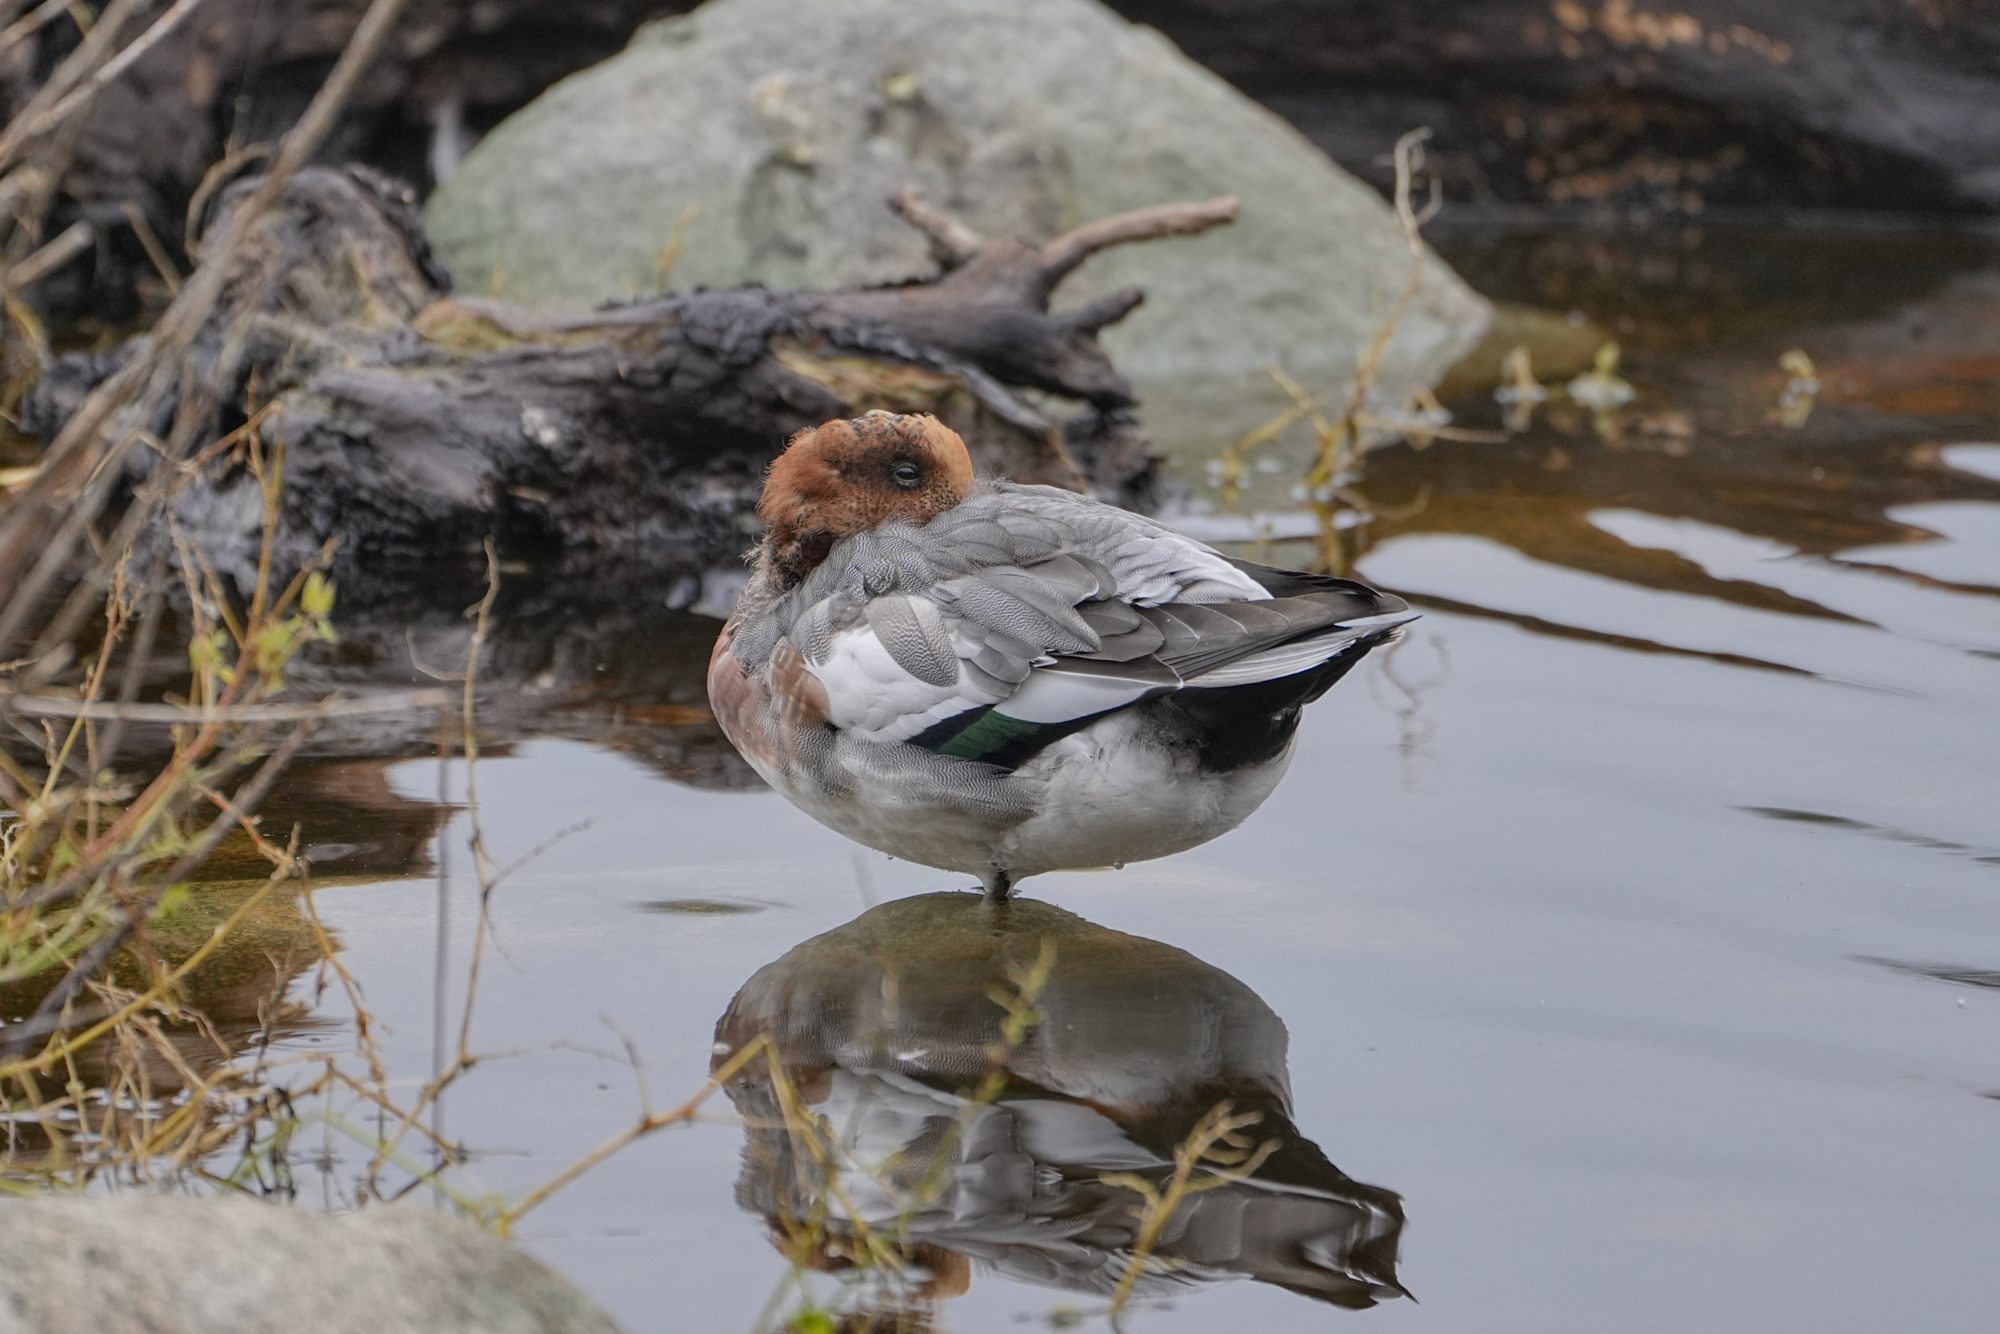 A male Eurasian Wigeon is standing in shallow water, his bill tucked under a wing. There are some rocks in the background and the light is overcast